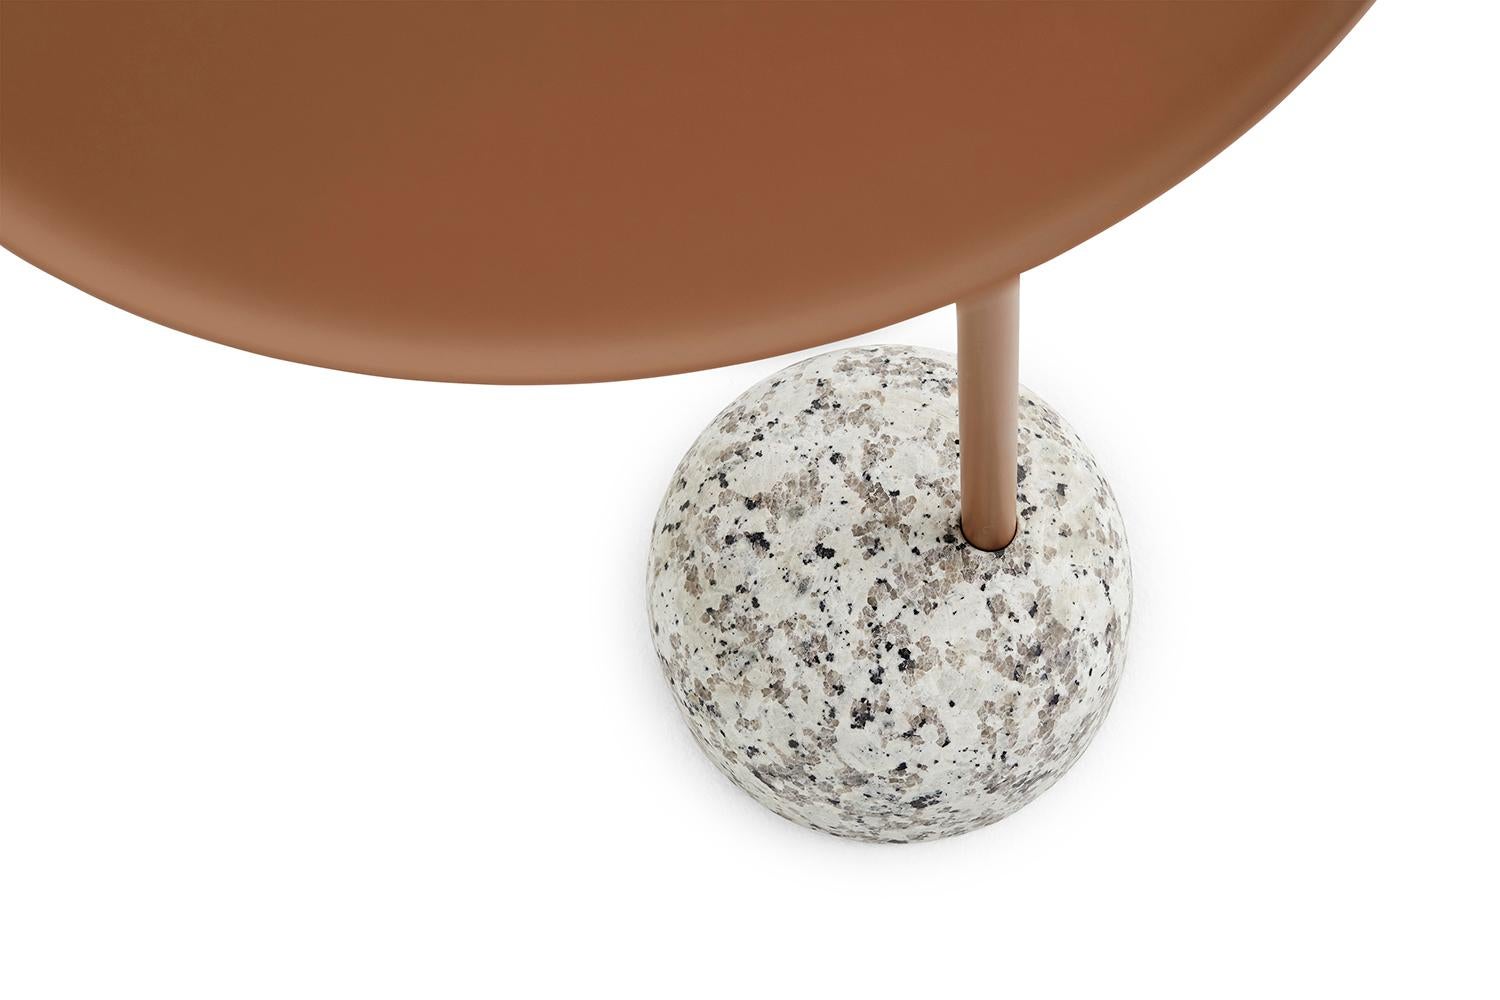 Shane Schneck’s bowler table is a compact side table that is ideal for small spaces. The single tube that extends upwards creates a defined profile, which doubles as a functional handle too. The stem, handle and tray are made in powder coated steel,